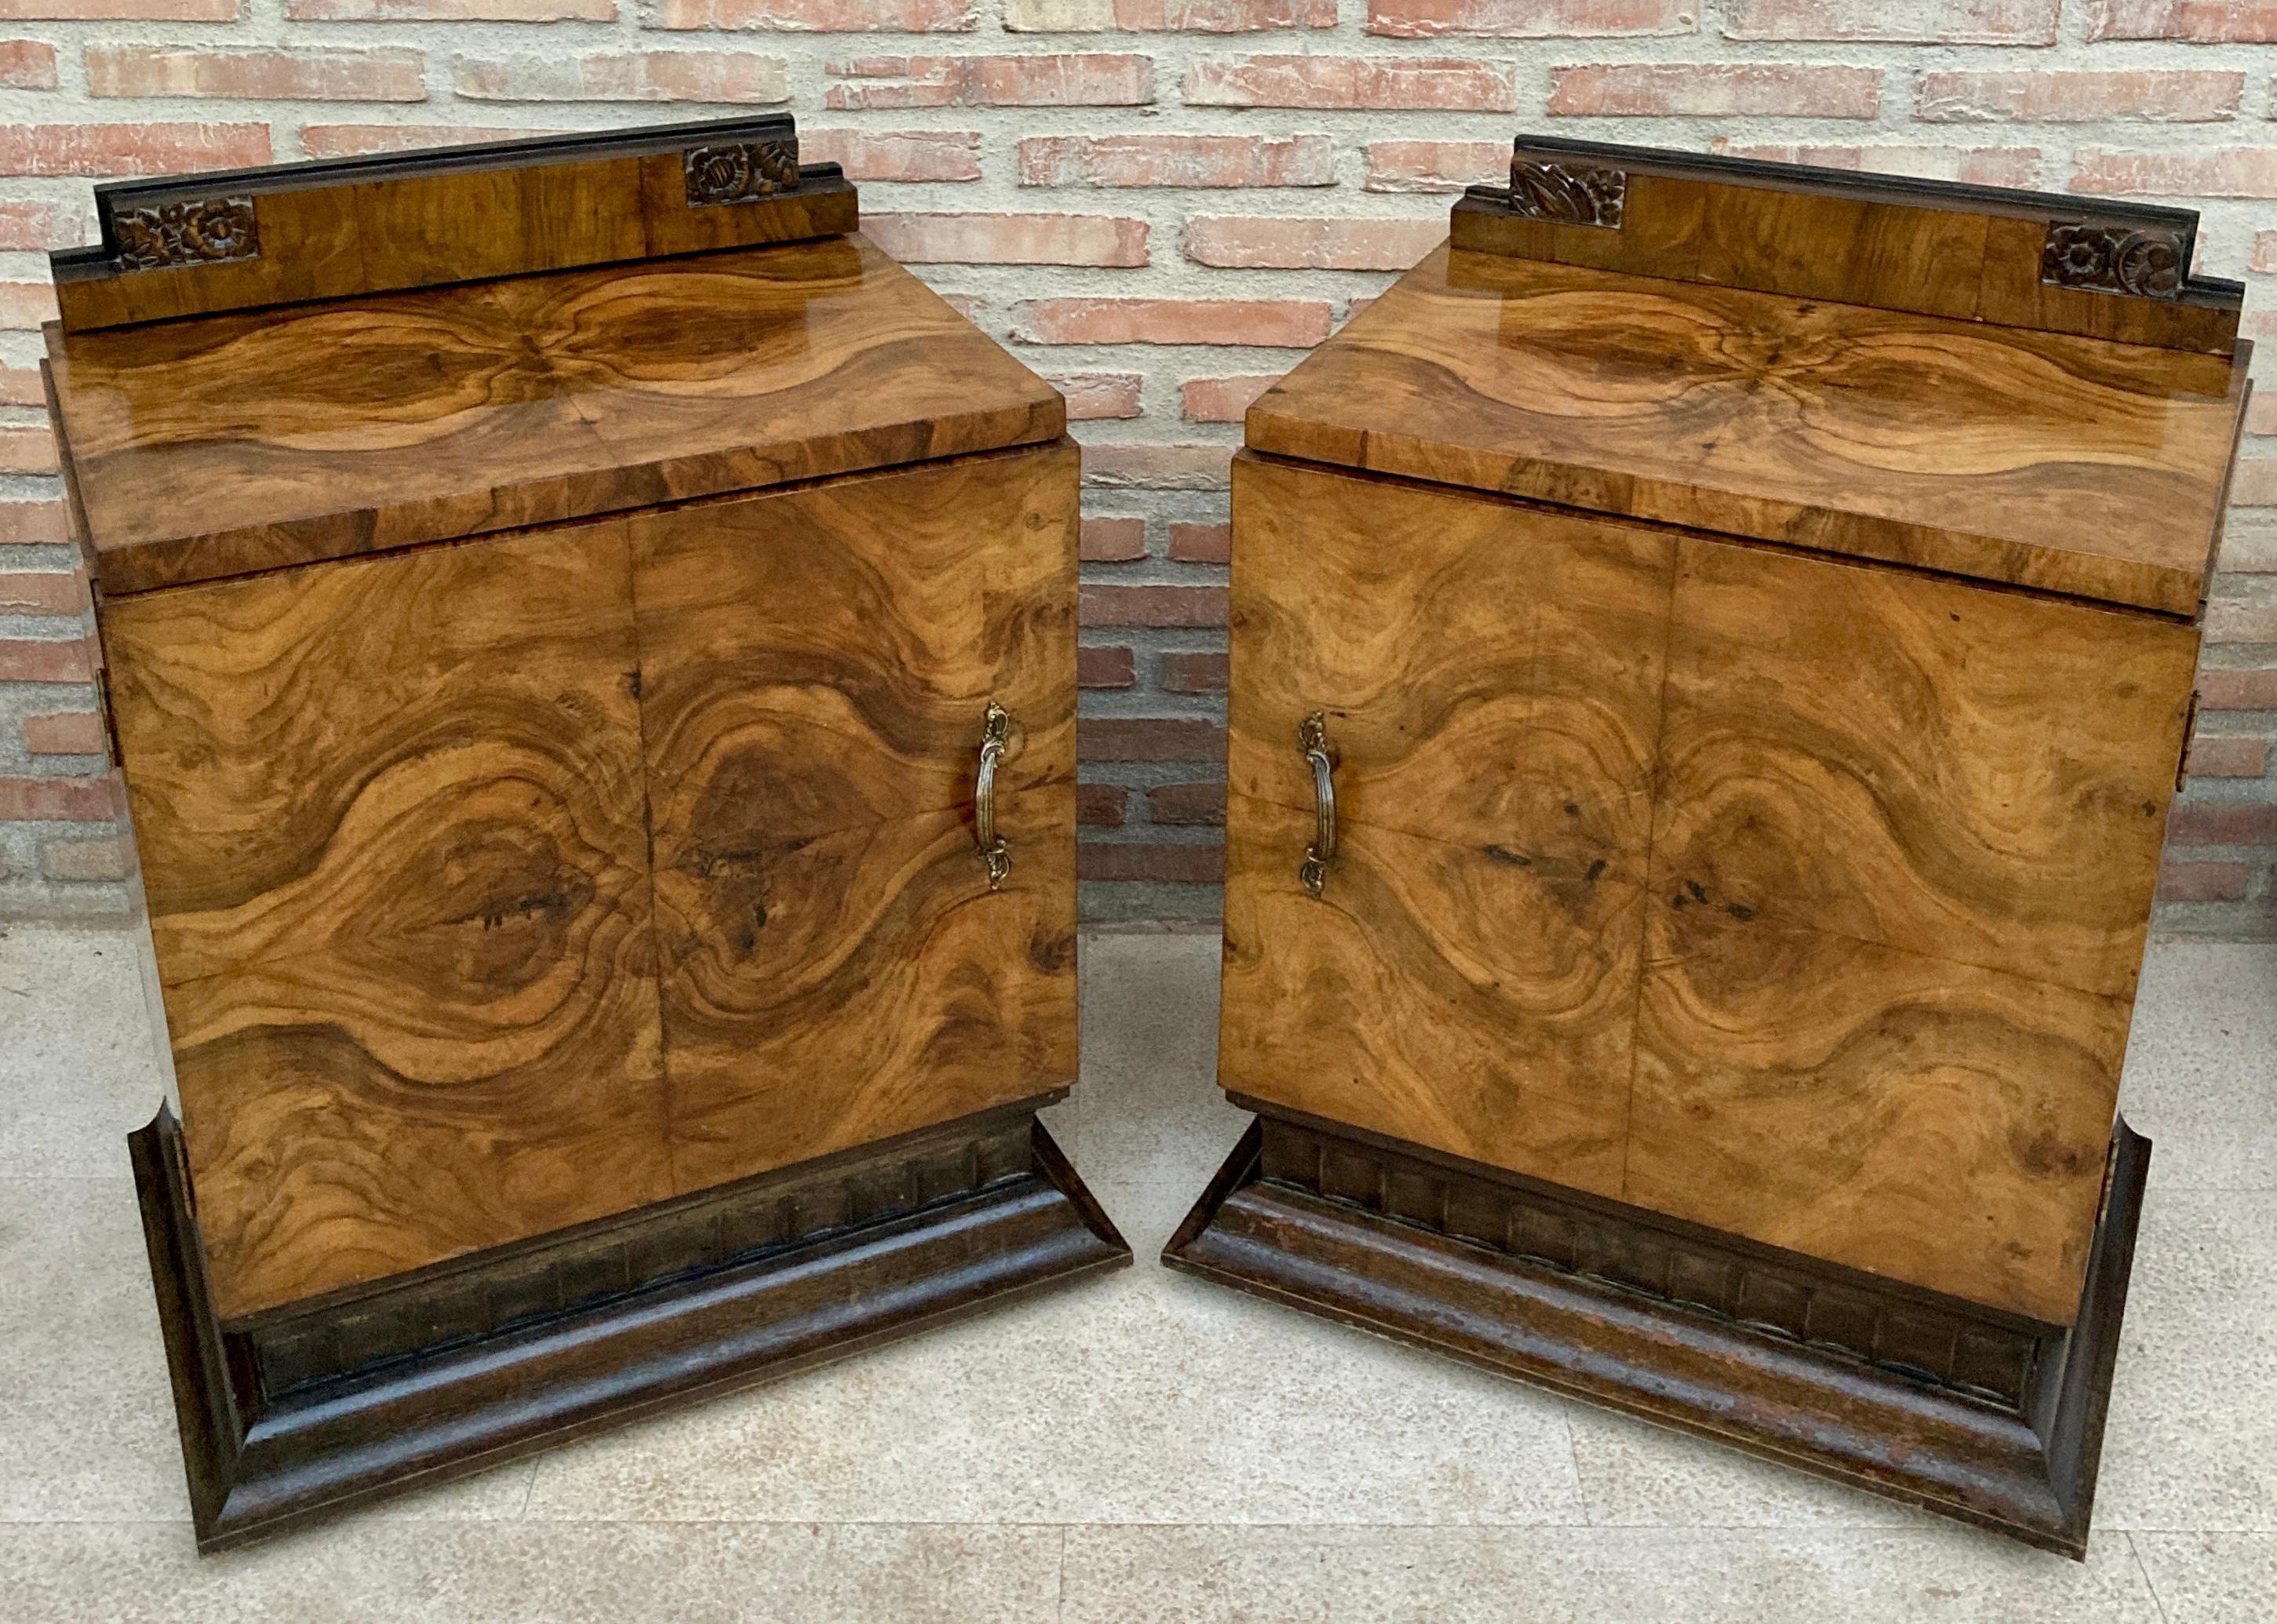 This pair of circa 1930s French art deco side cabinets could be used to flank a sofa or as nightstands. Each has a storage compartment with a hinged door and narrow open shelves on the sides and an interior drawer. The cabinets sit on an ebonized